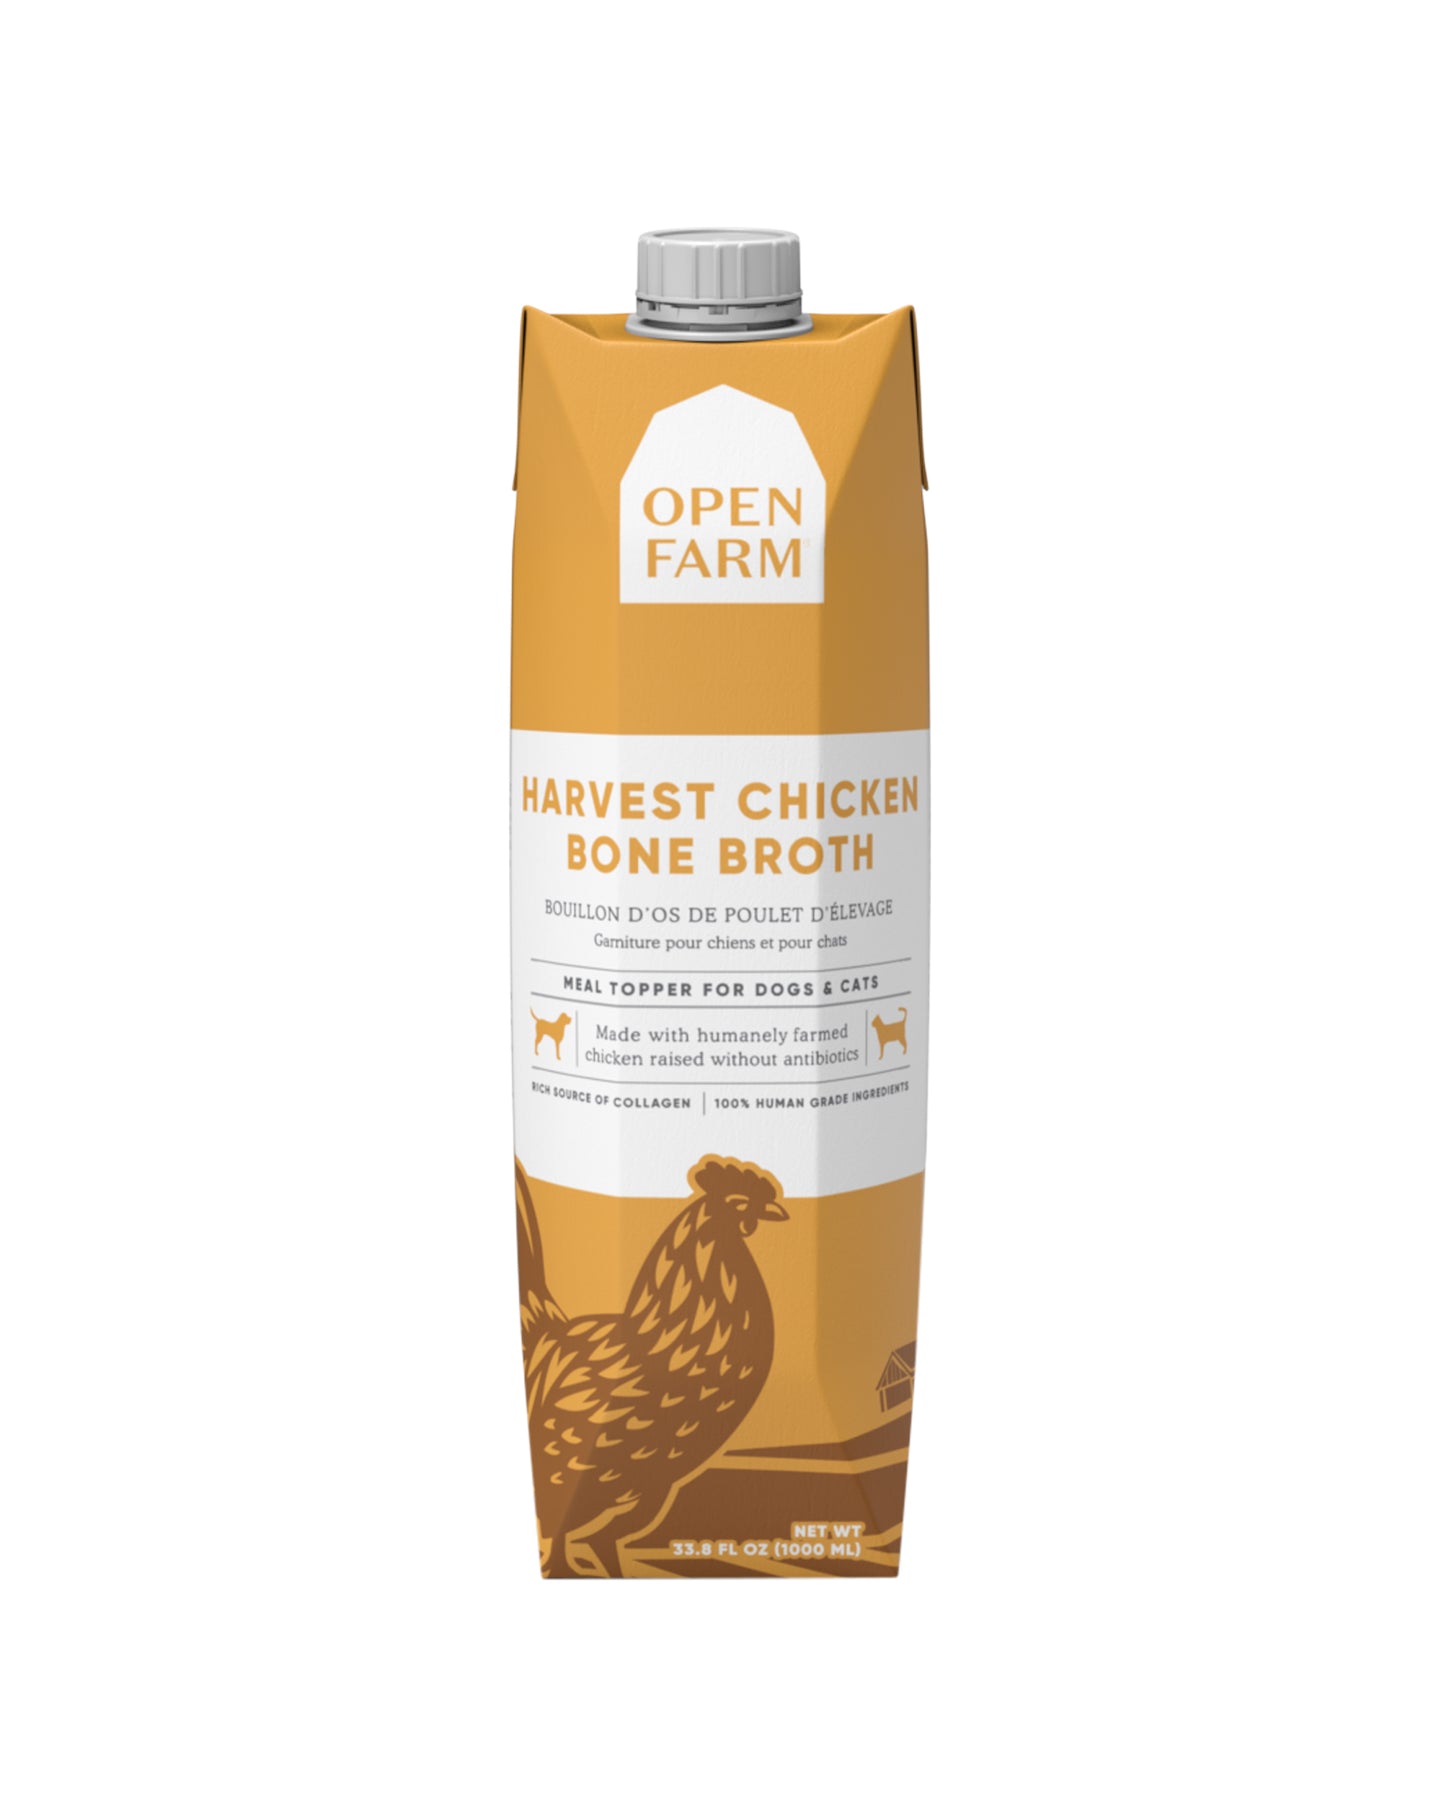 Harvest Chicken Bone Broth for Dogs & Cats